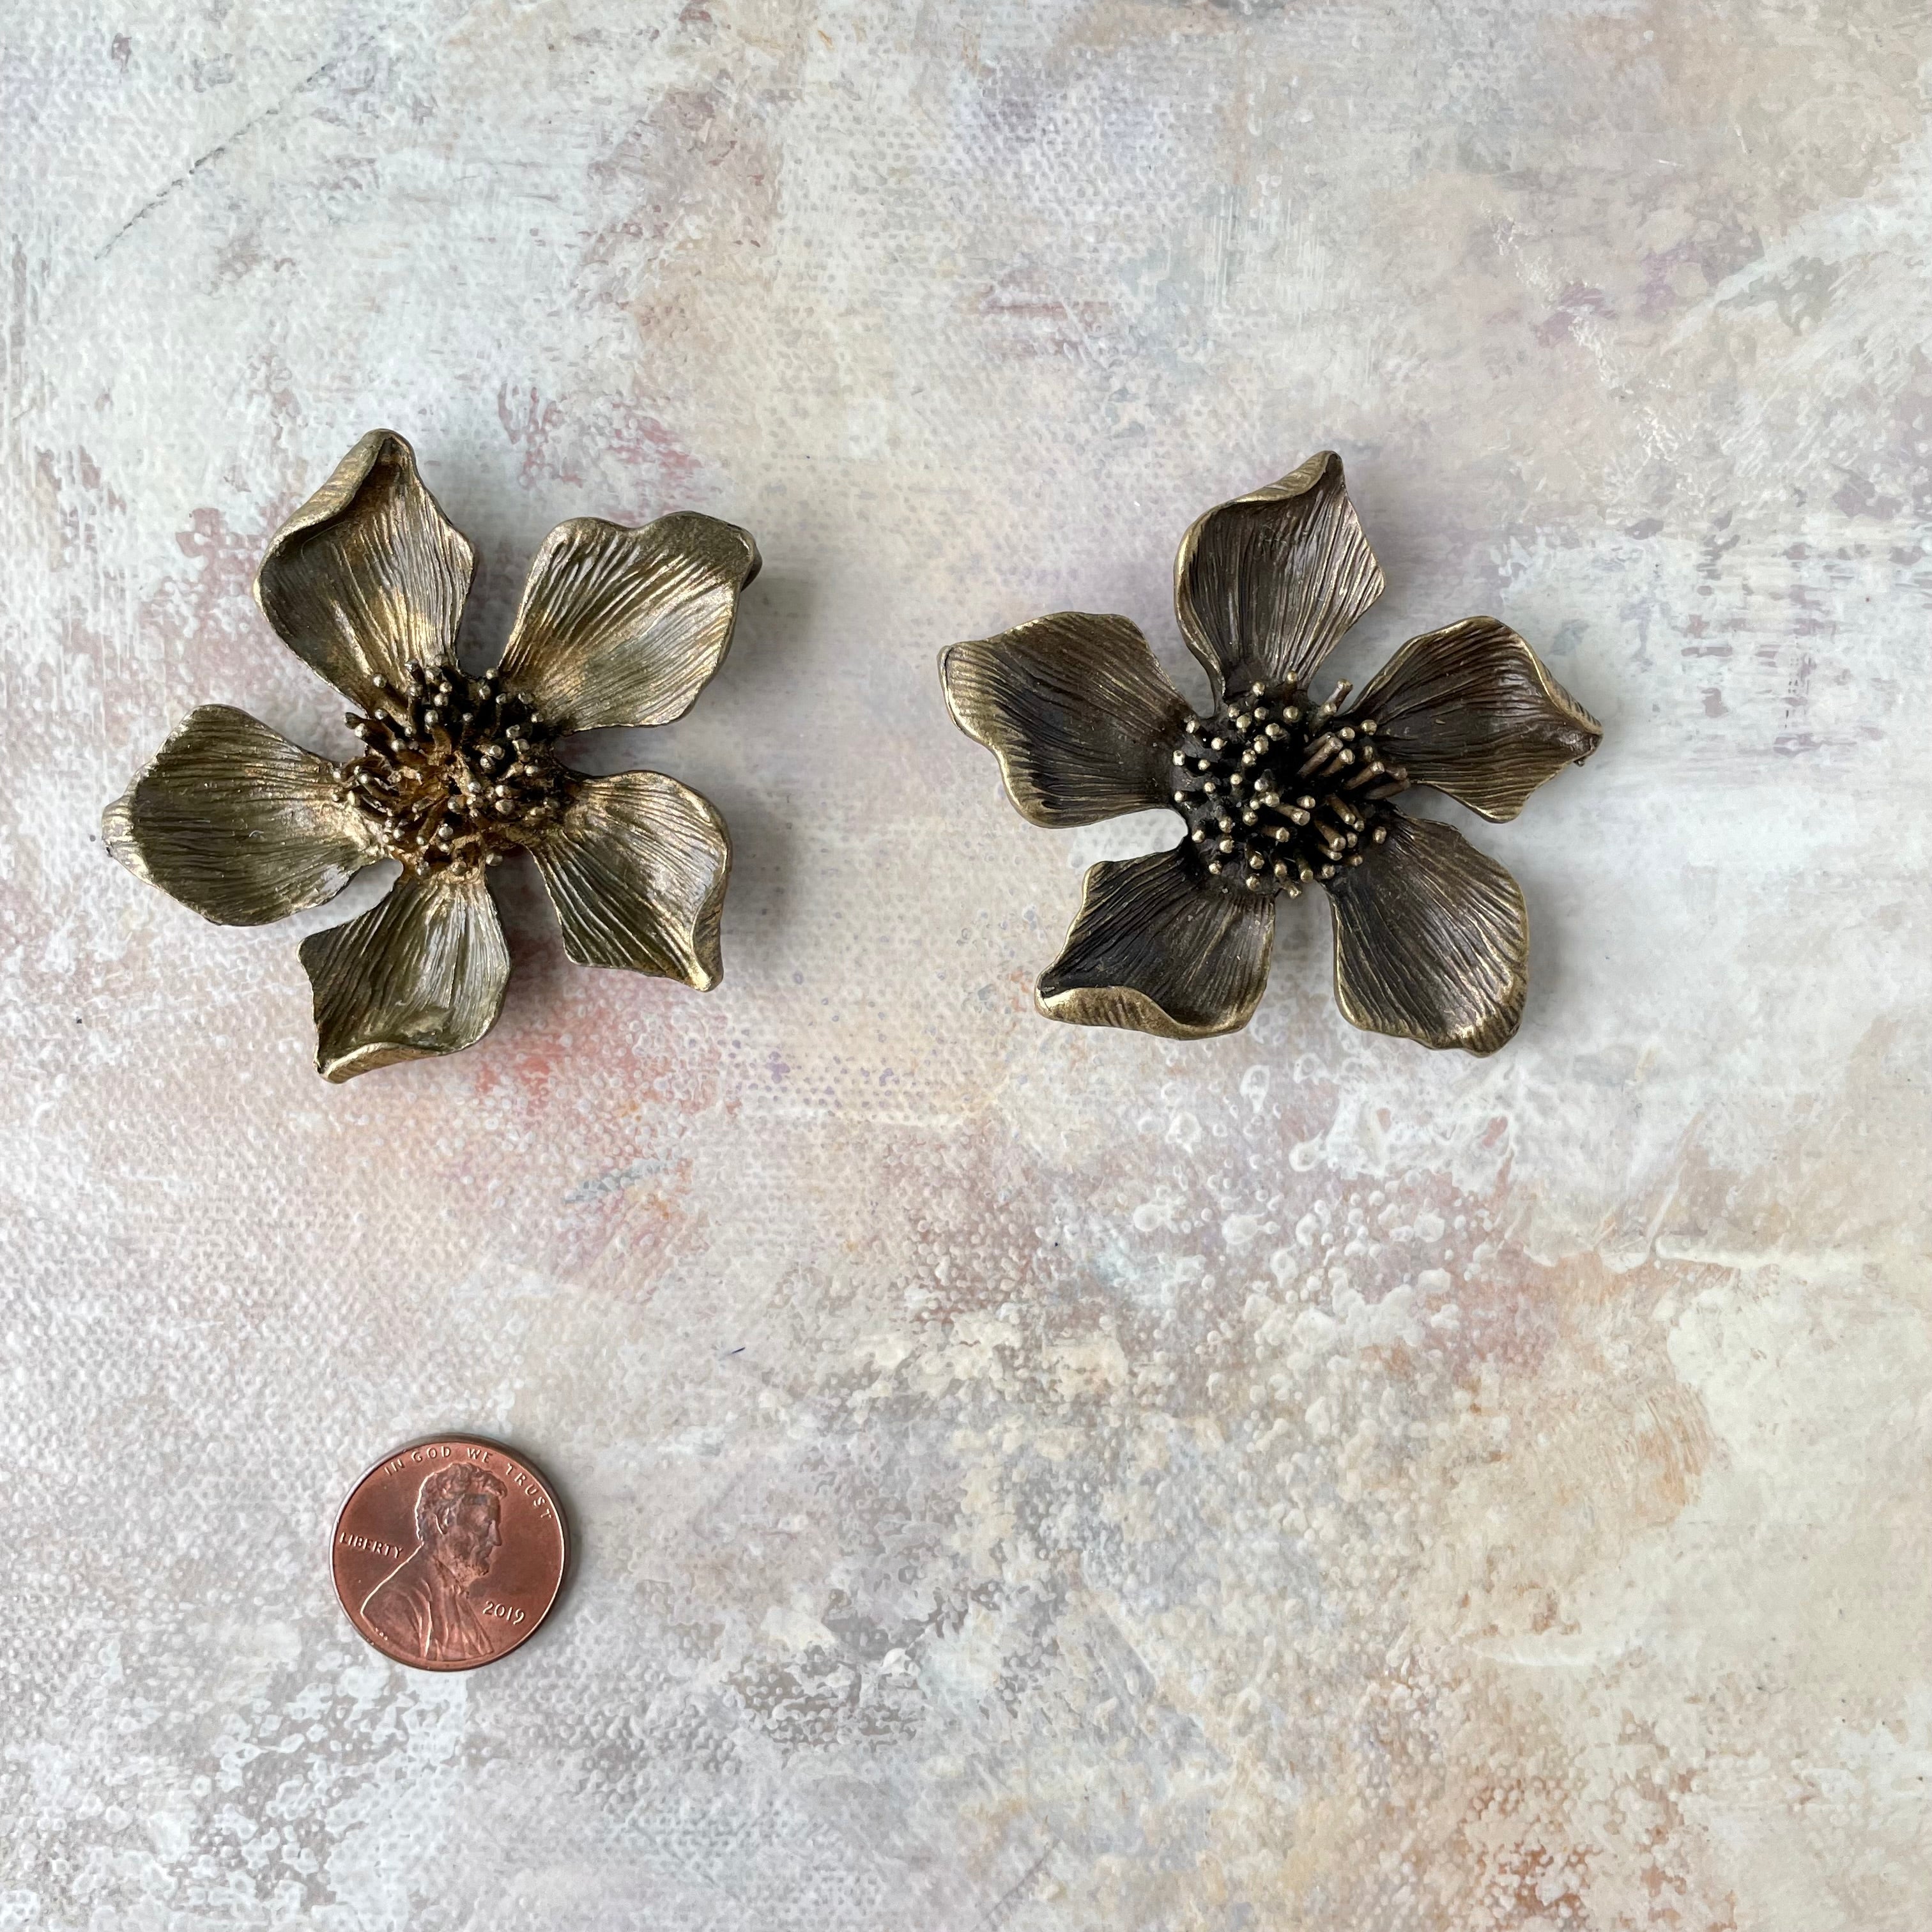 2 larger metal styling flower with penny beside for size reference - flat lay props from Champagne & GRIT